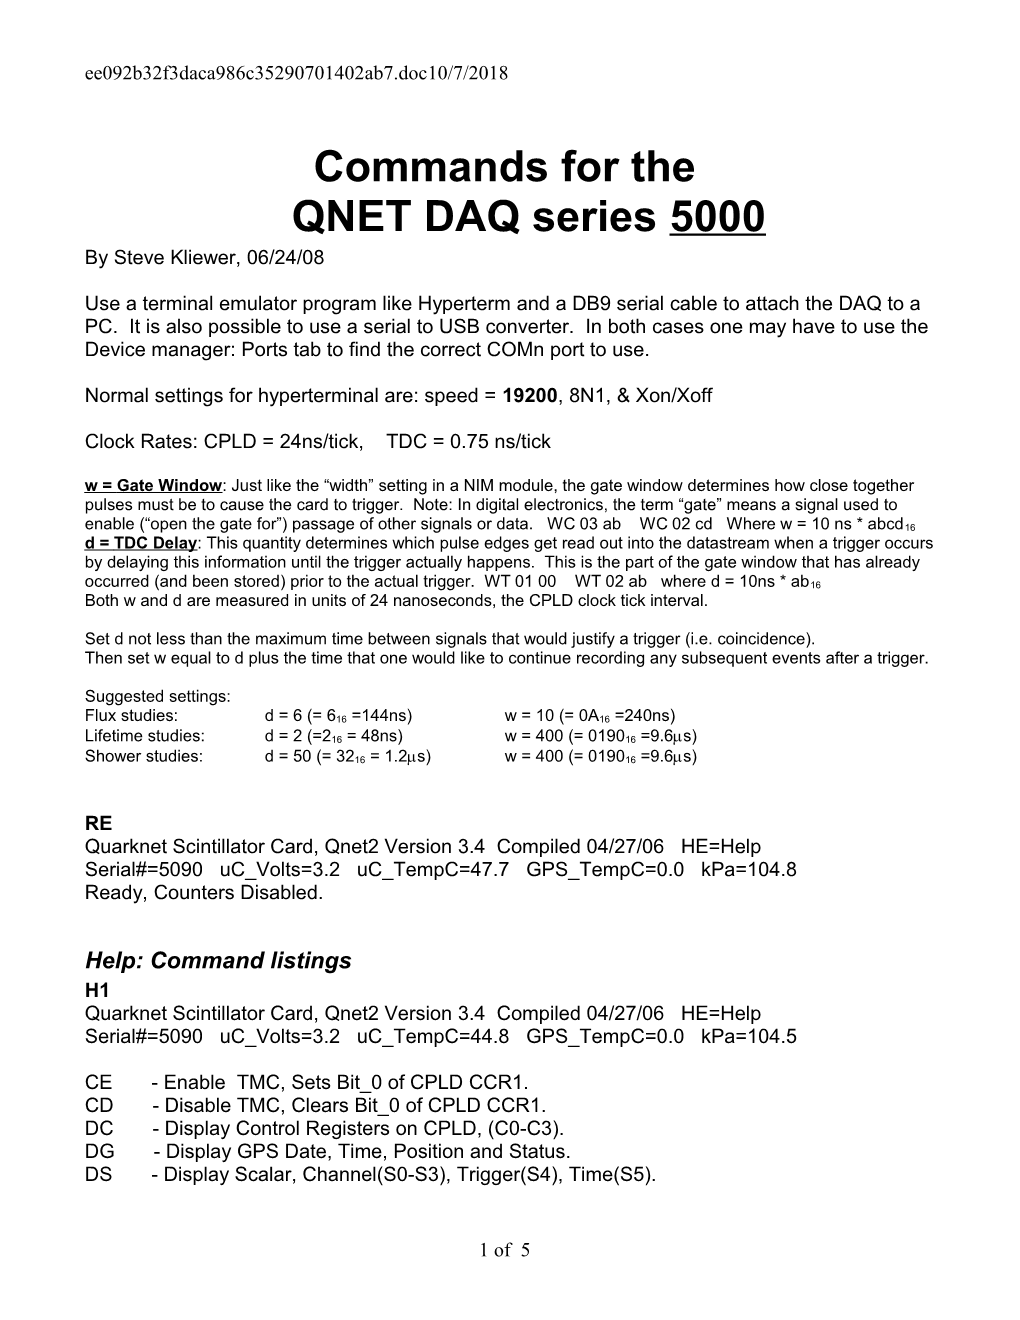 QNET DAQ Function and Use